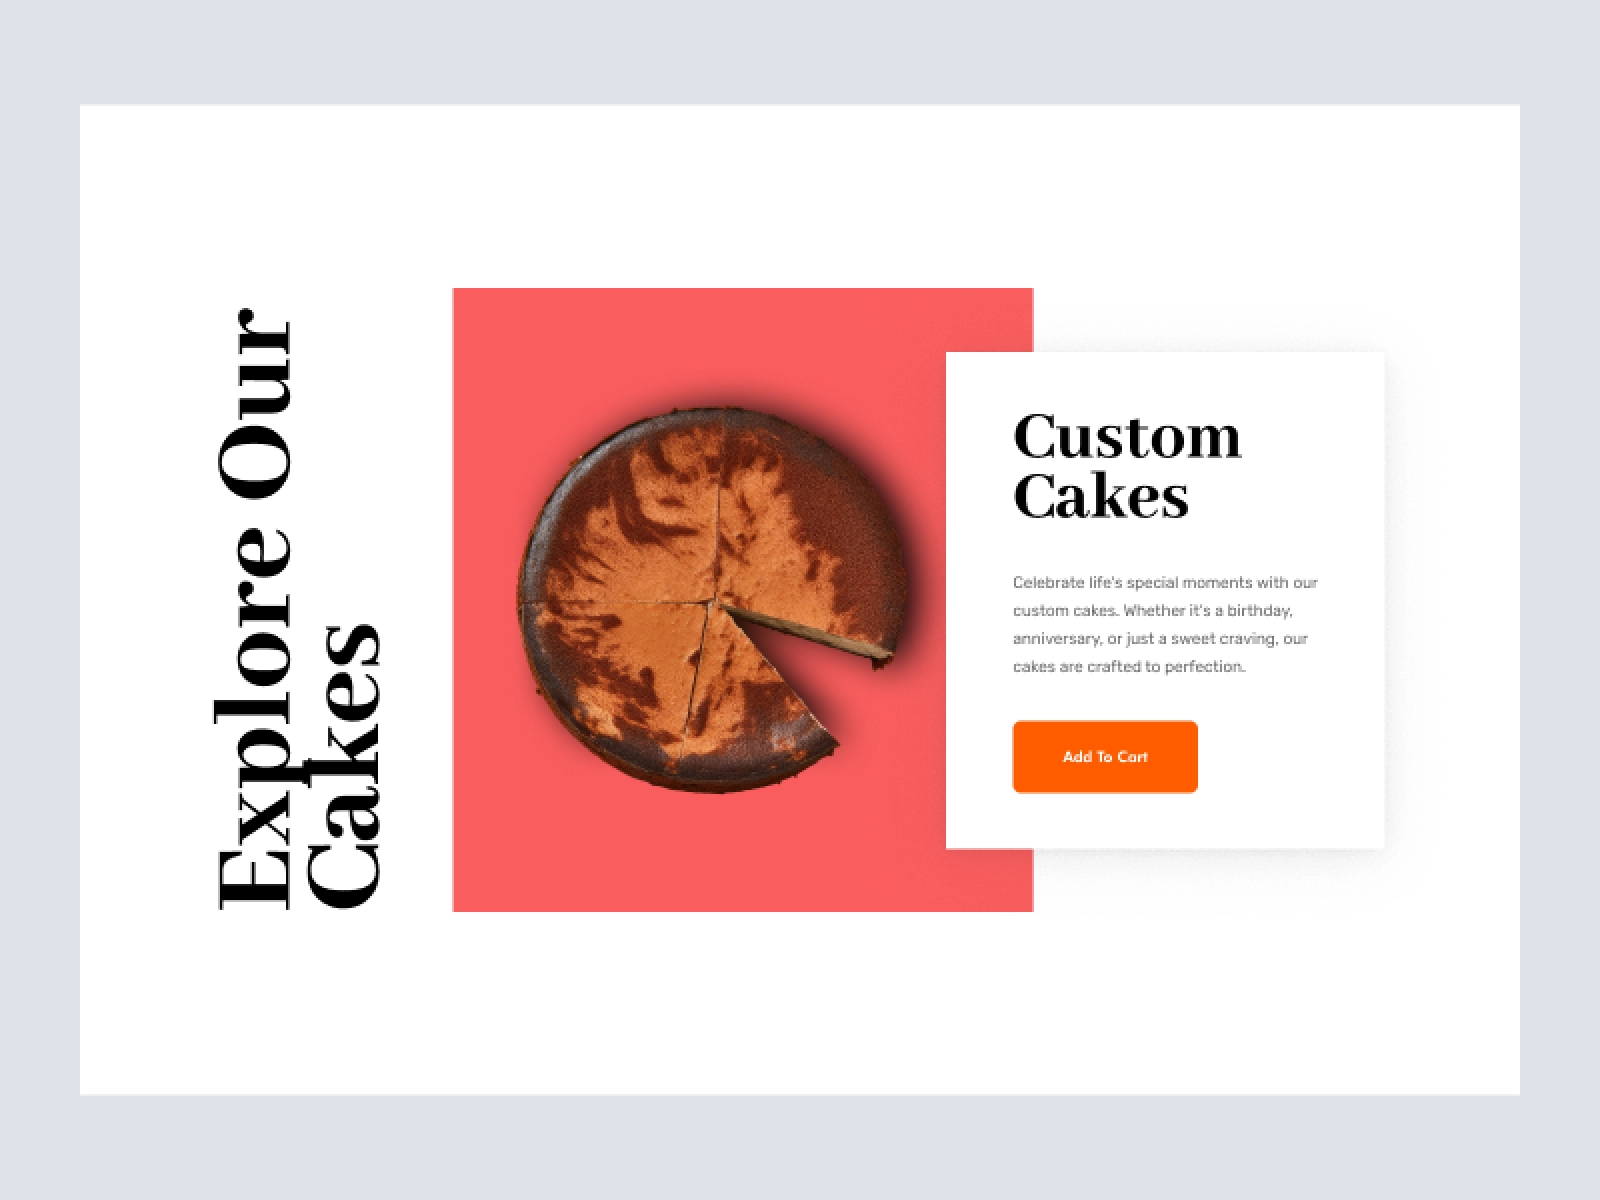 Bakery Shopify Store Design for Figma and Adobe XD - screen 4